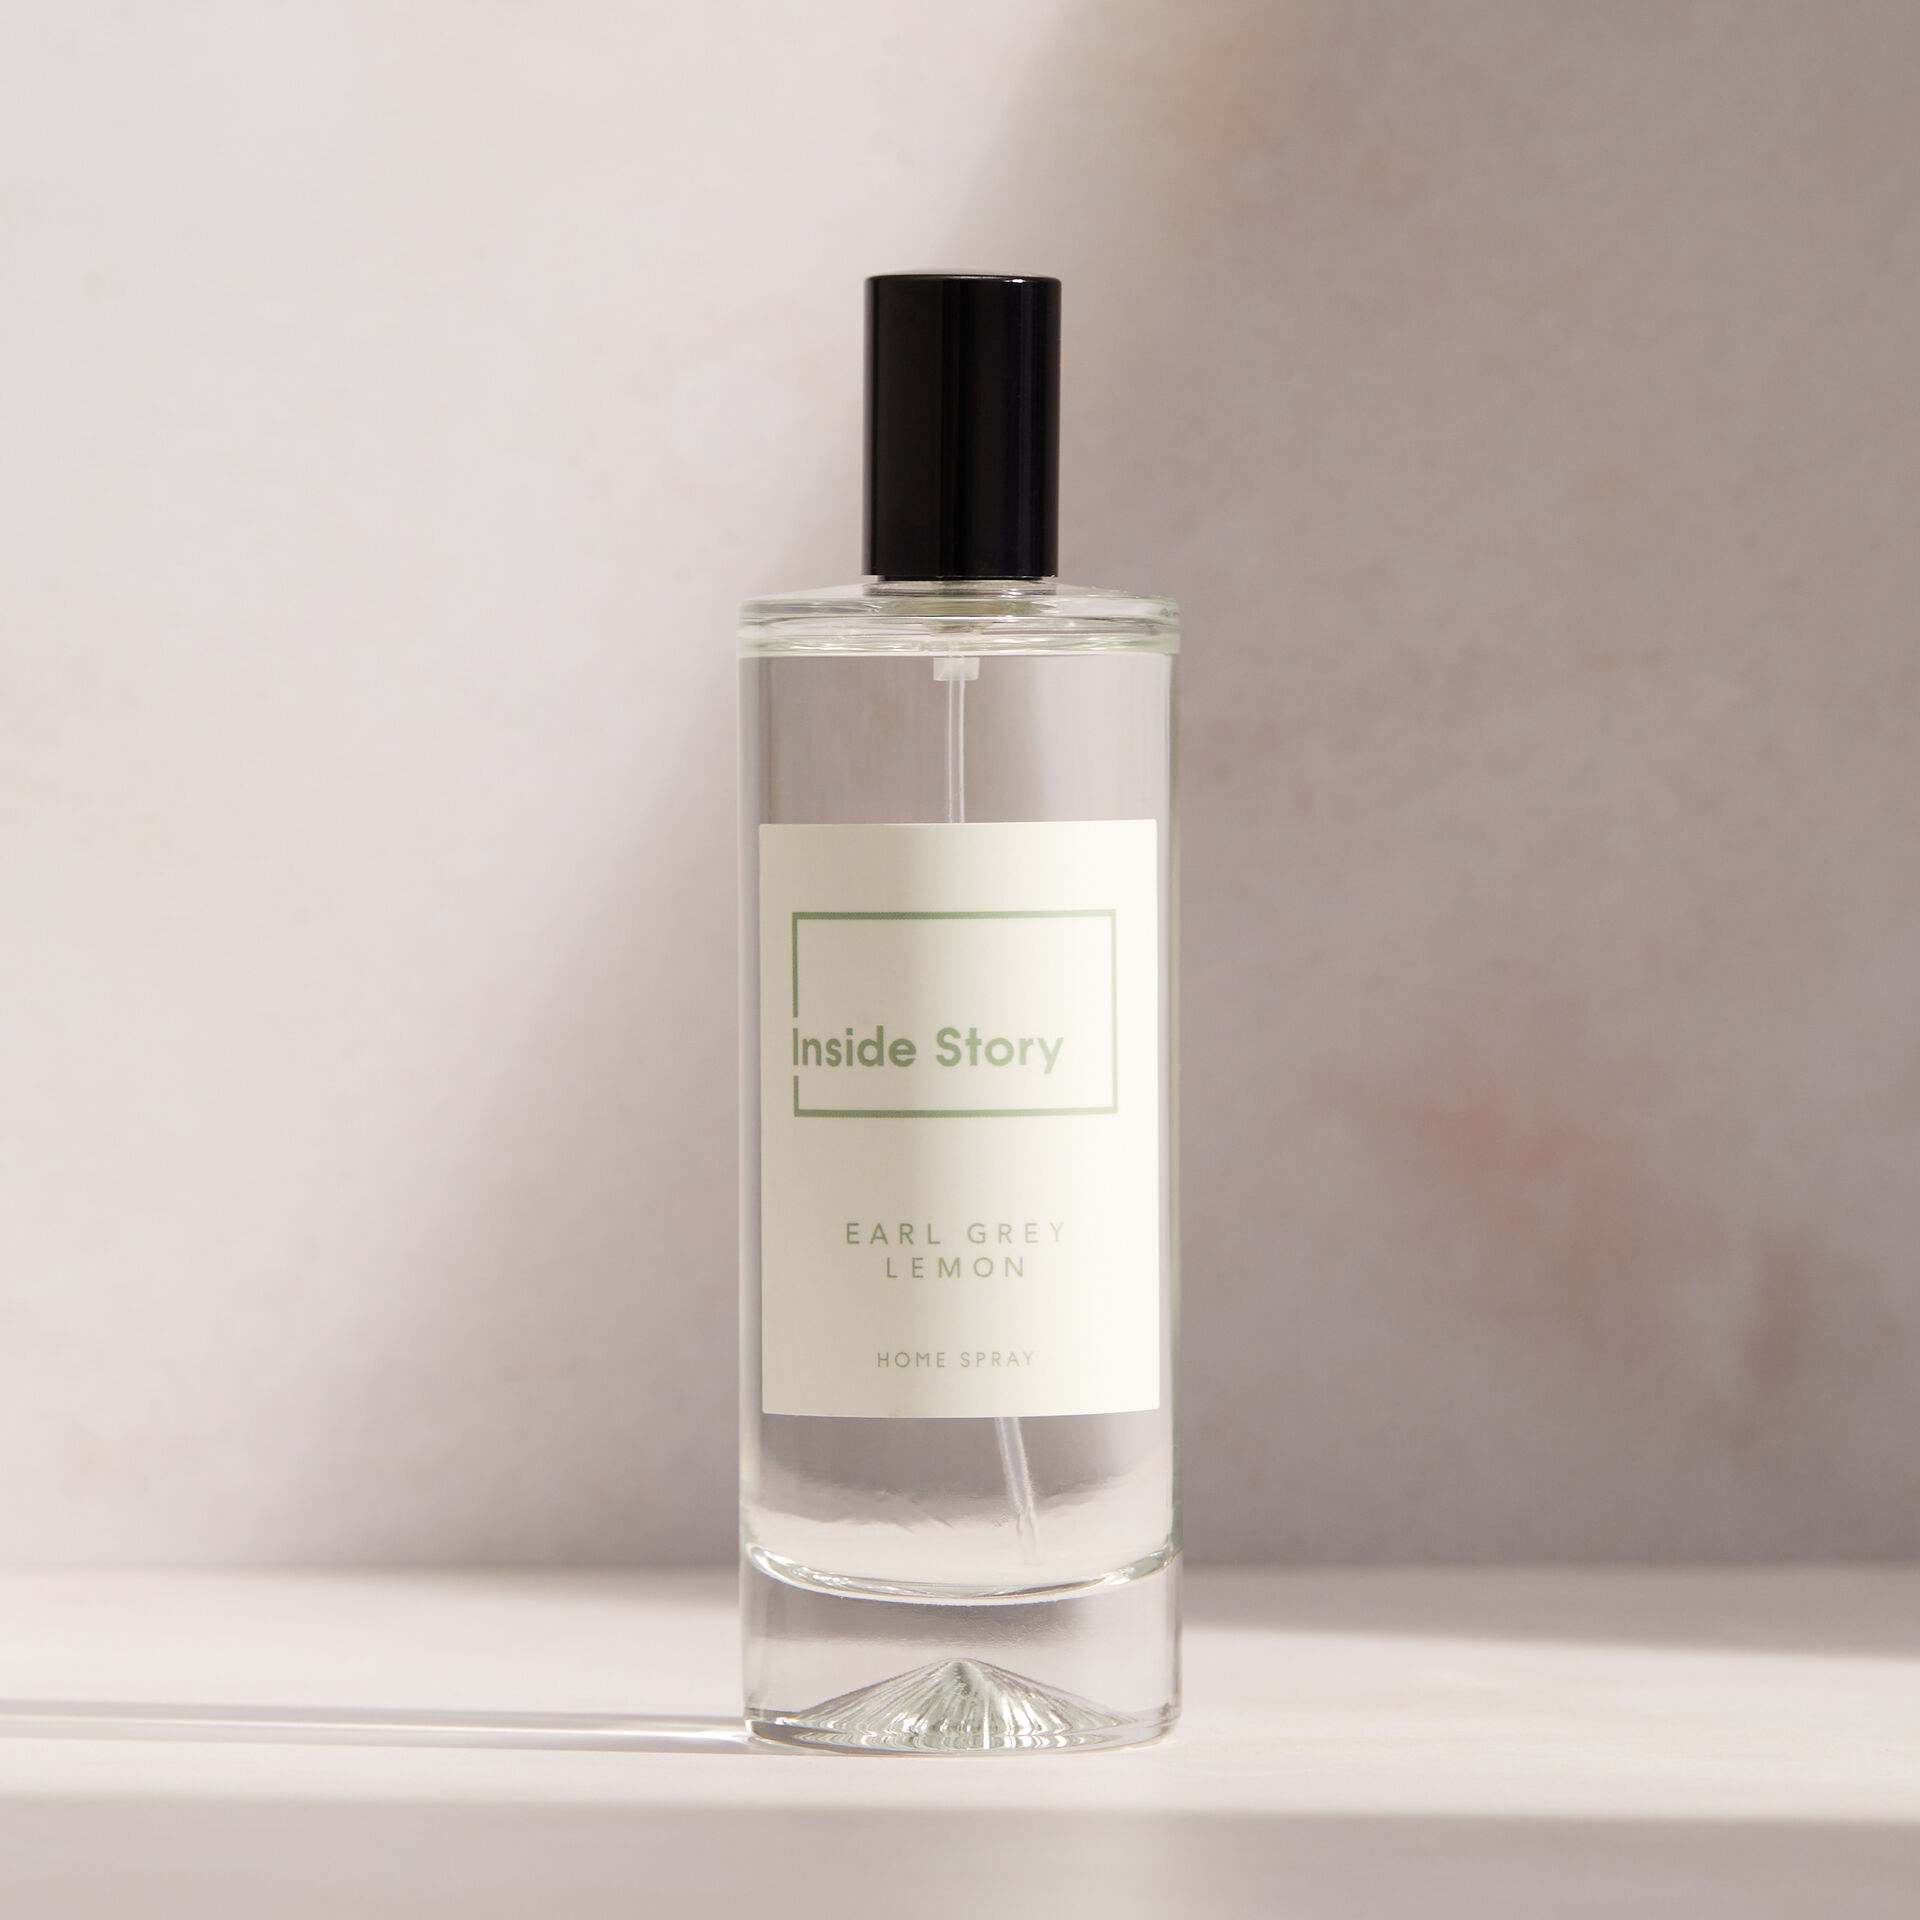 ${product-id}-Earl Grey And Lemon Home Spray-Neutral-${view-type}